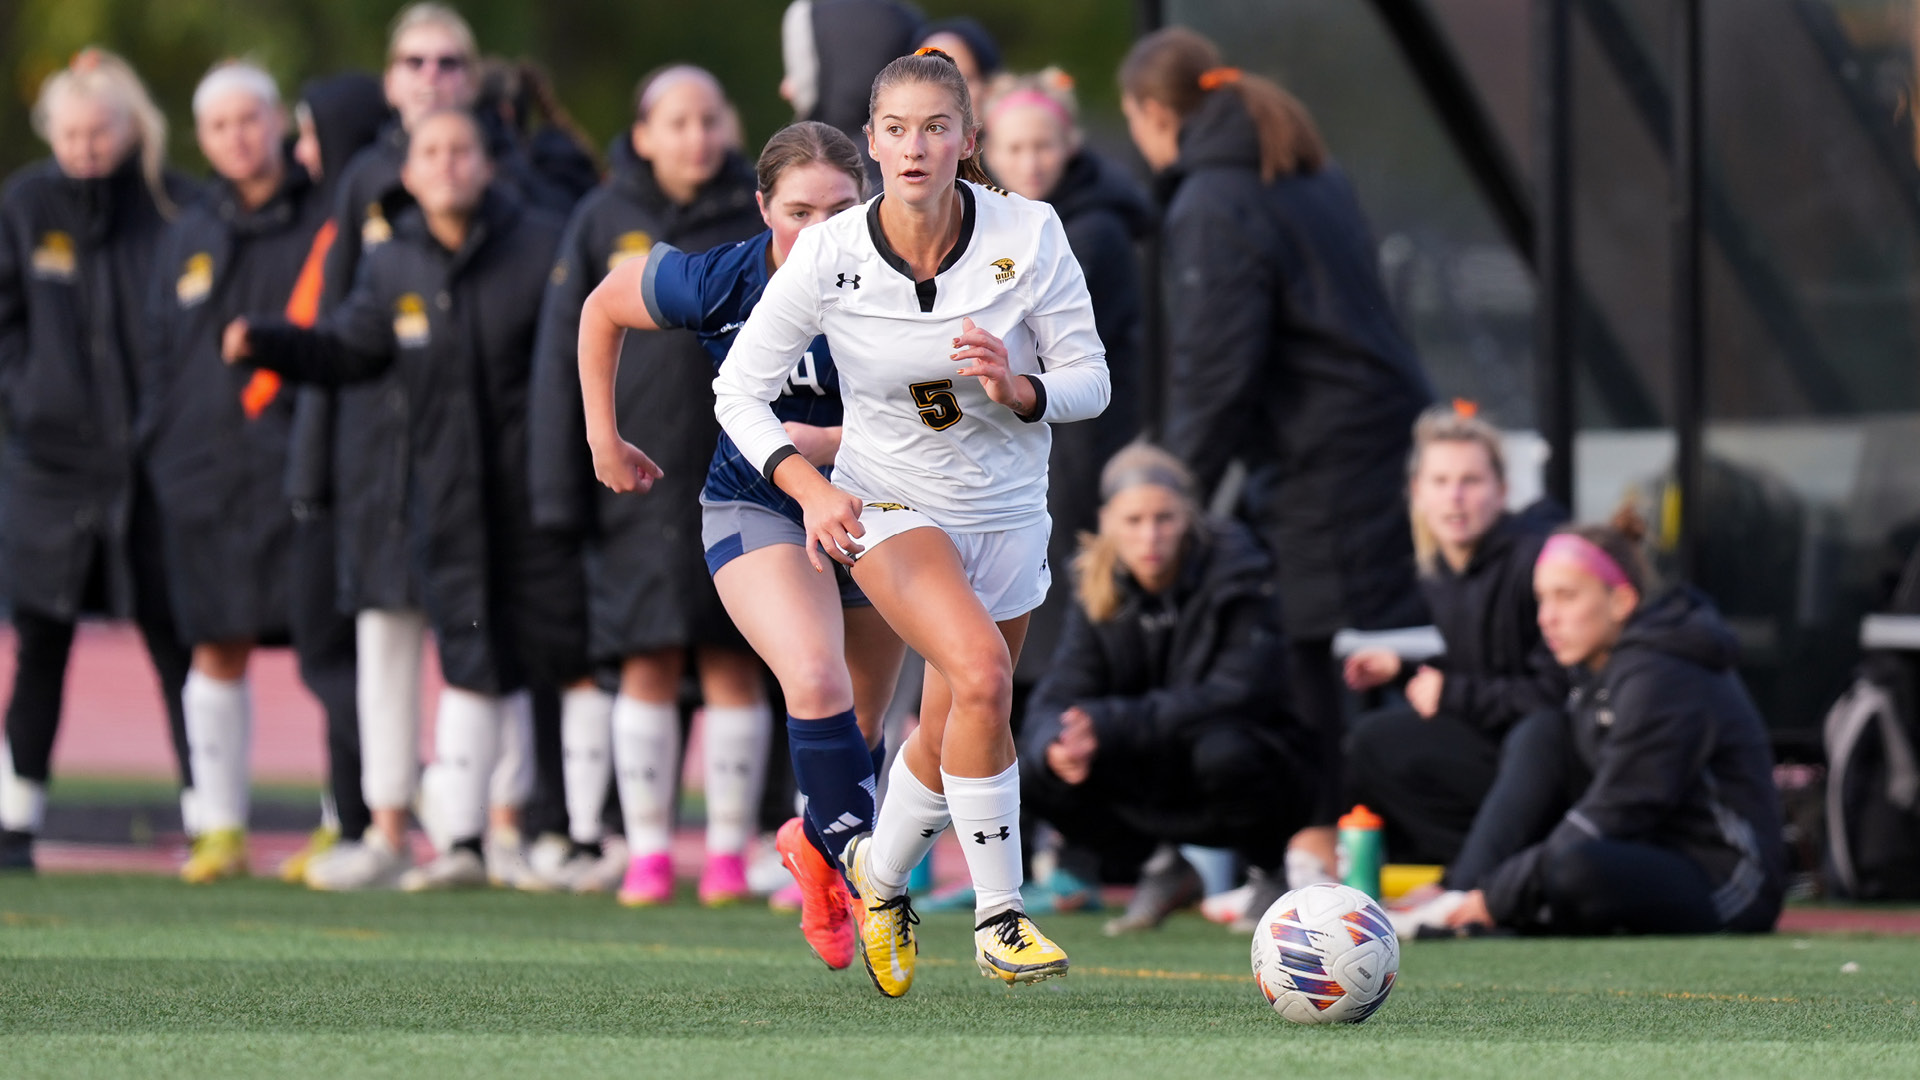 Alayna Clark scored in the 38th minute of the Titans' win over UW-Stout